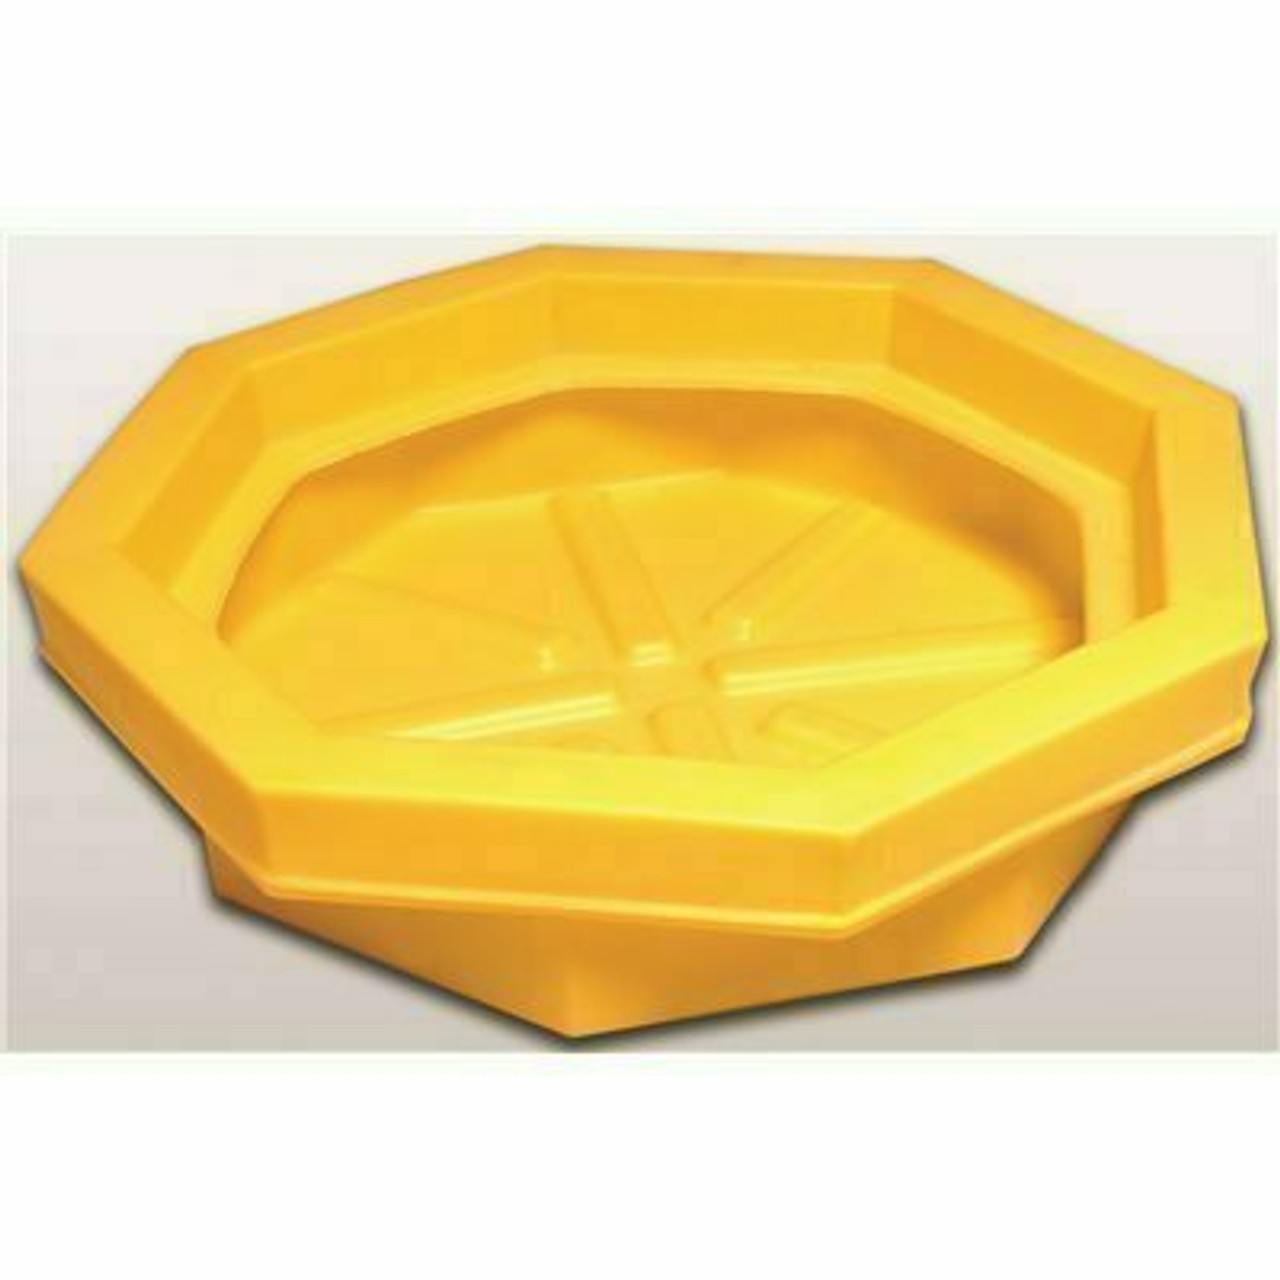 Ultratech International Ultratech Ultra-Drum Tray With Grate, 21.1 Gallon Capacity